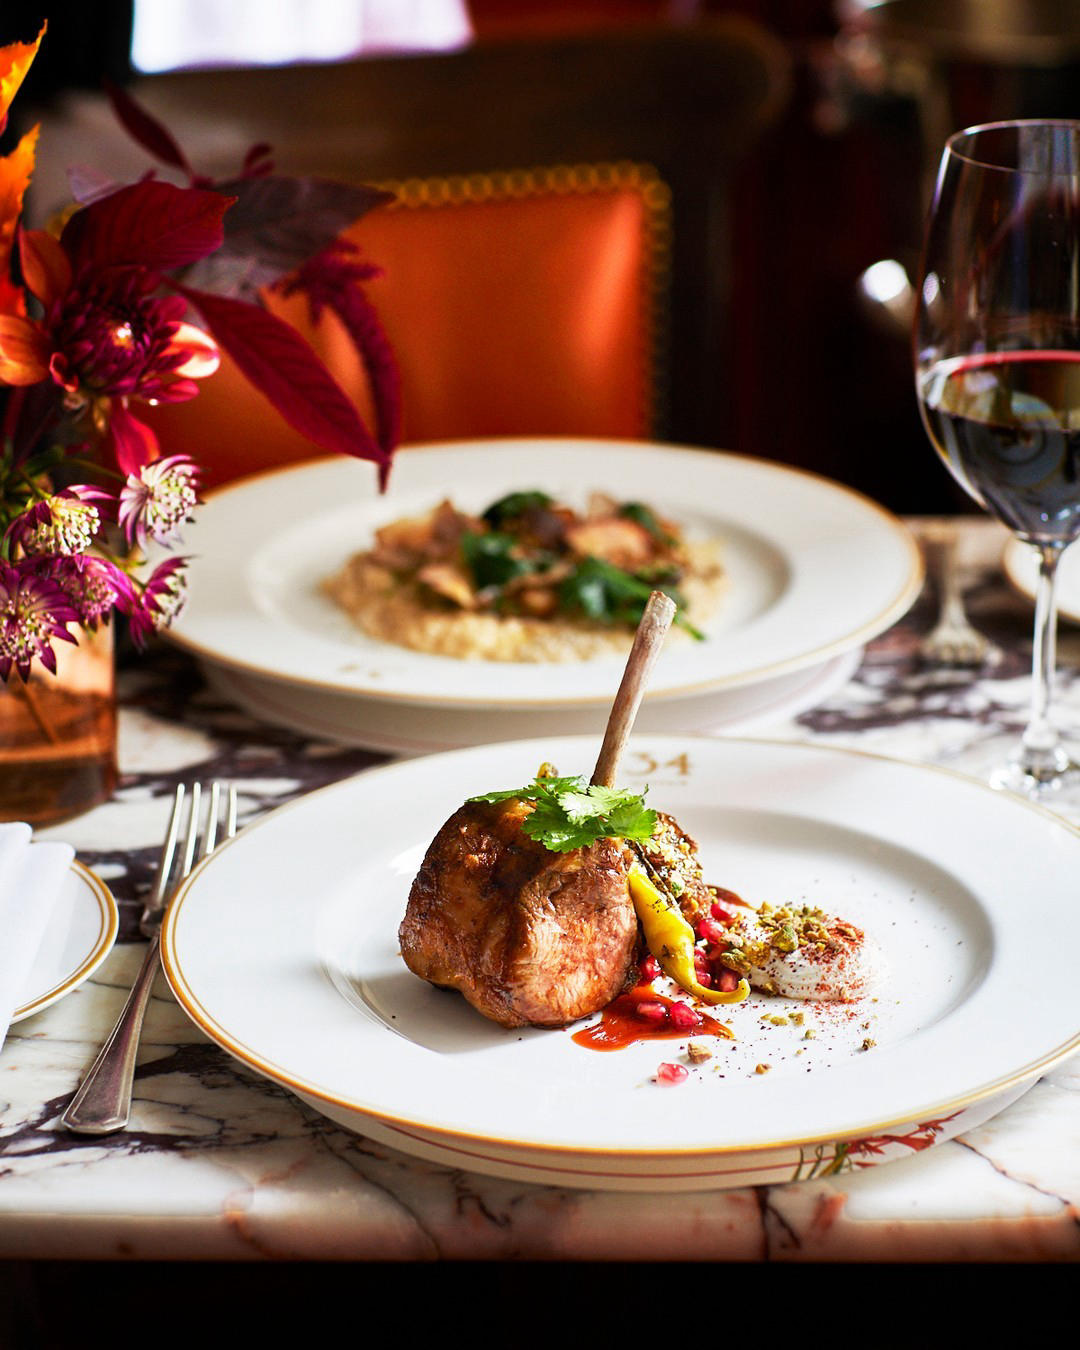 34 Mayfair - Fall into the warmth and abundance of the season at 34 with new Autumn specials such as